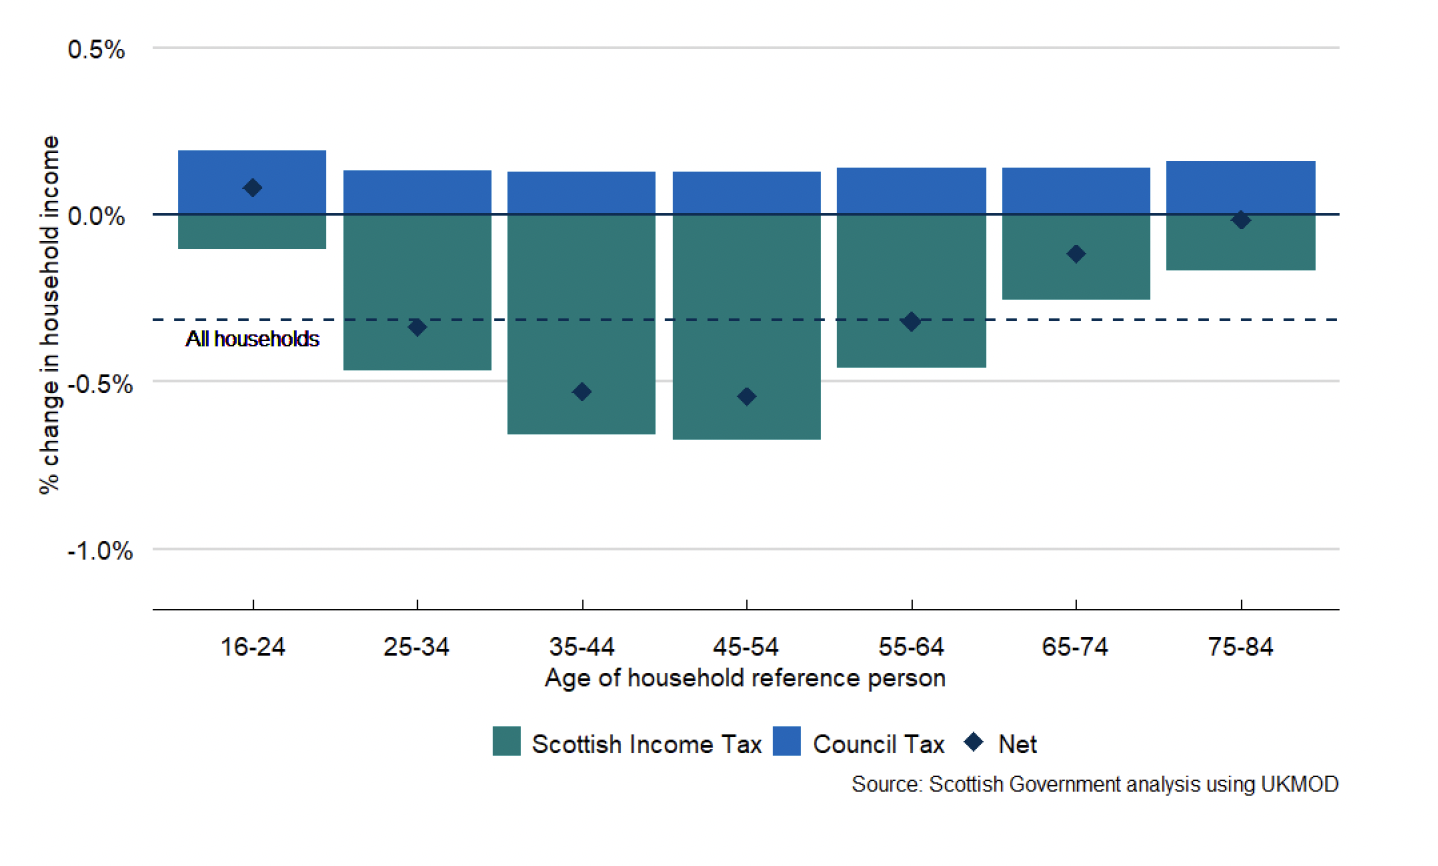 a bar chart showing the impact of tax policy measures as a proportion of net household income for 10 year age bands between 16-24 and 75-84. The impact of devolved council tax is positive for all age groups. The impact of Scottish Income Tax is negative, and follows a U shaped pattern, with the greatest impact on households where the household reference person is 45 to 54. The net impact is also U shaped, and negative for all age groups except 16 to 24. 